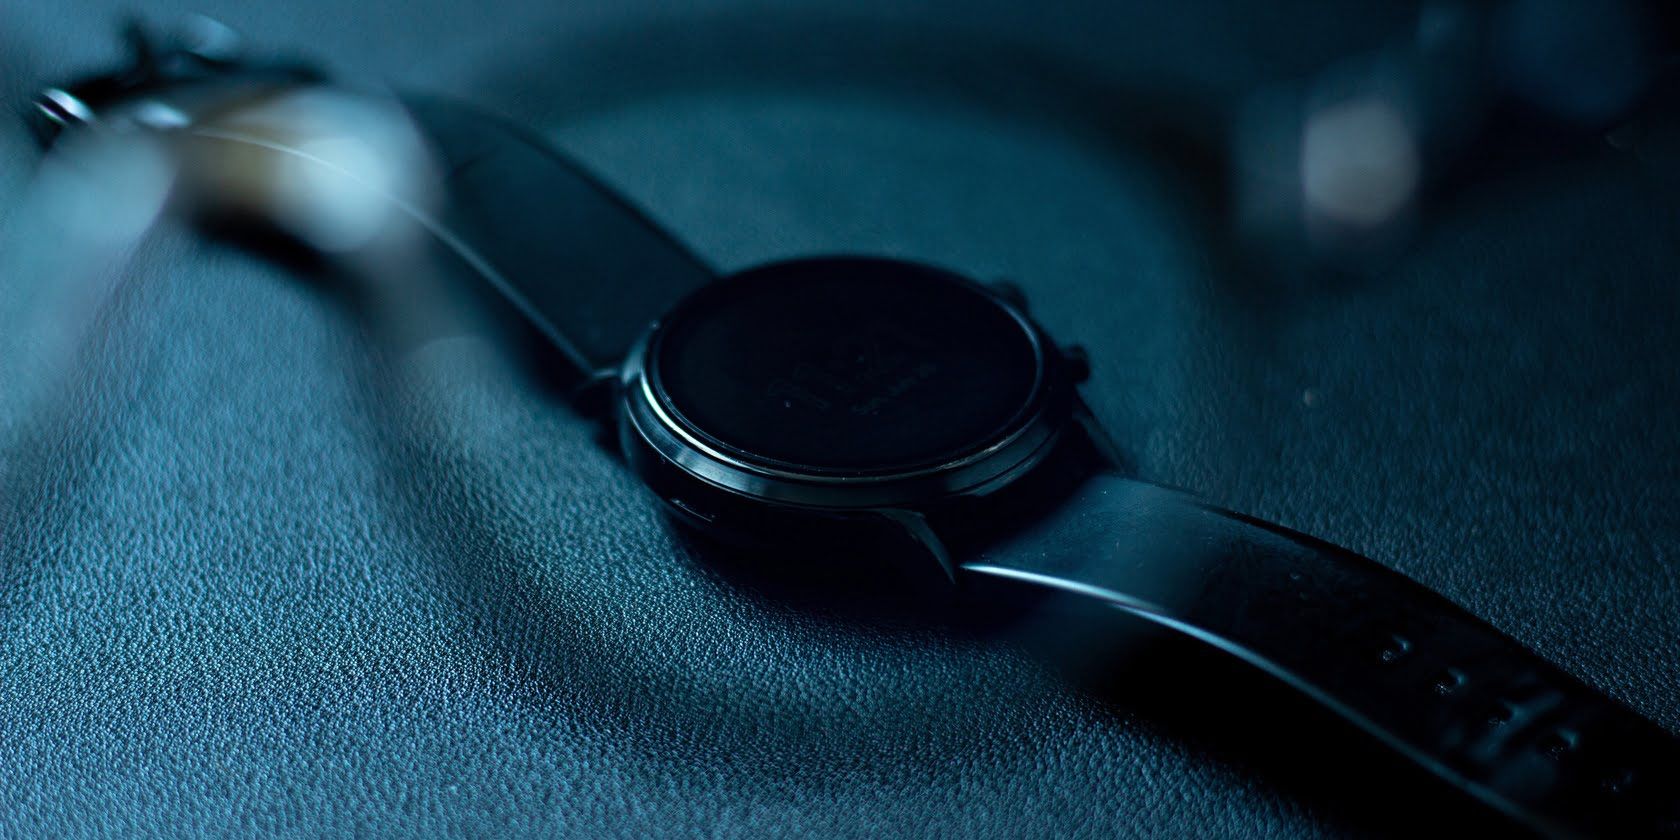 Black smartwatch seen through a pair of glasses